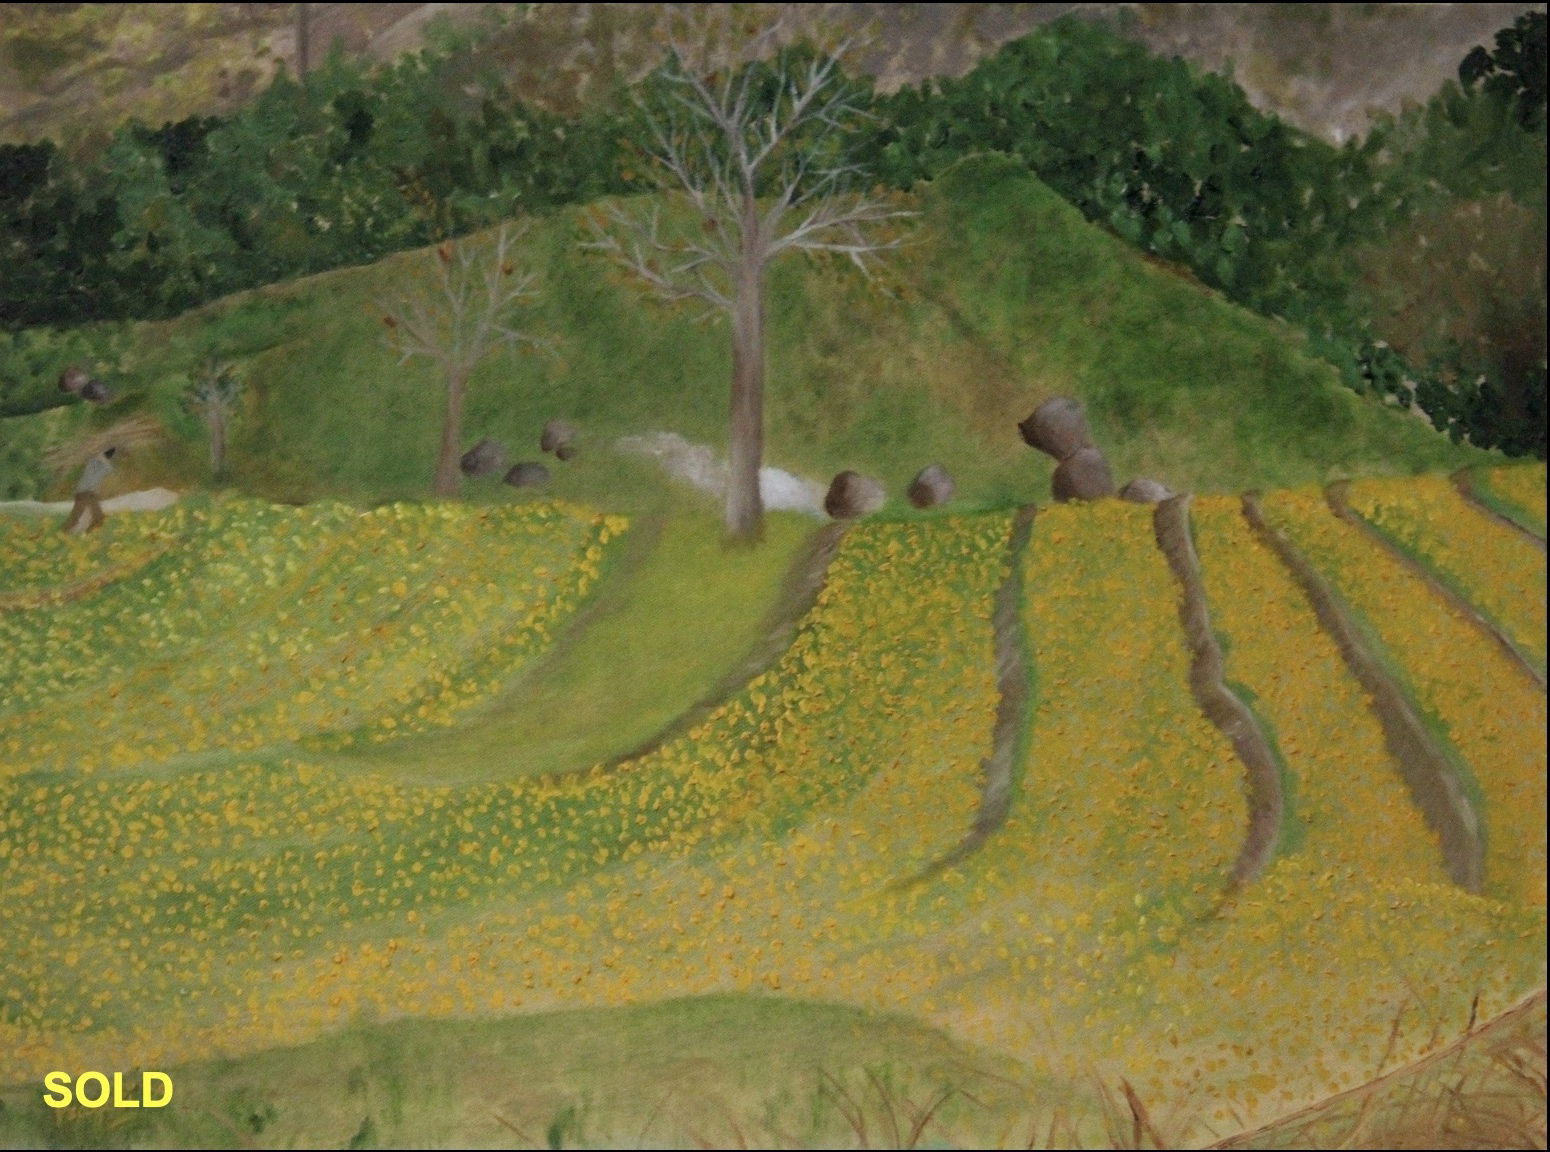 Golden Fields of Palampur - Sold